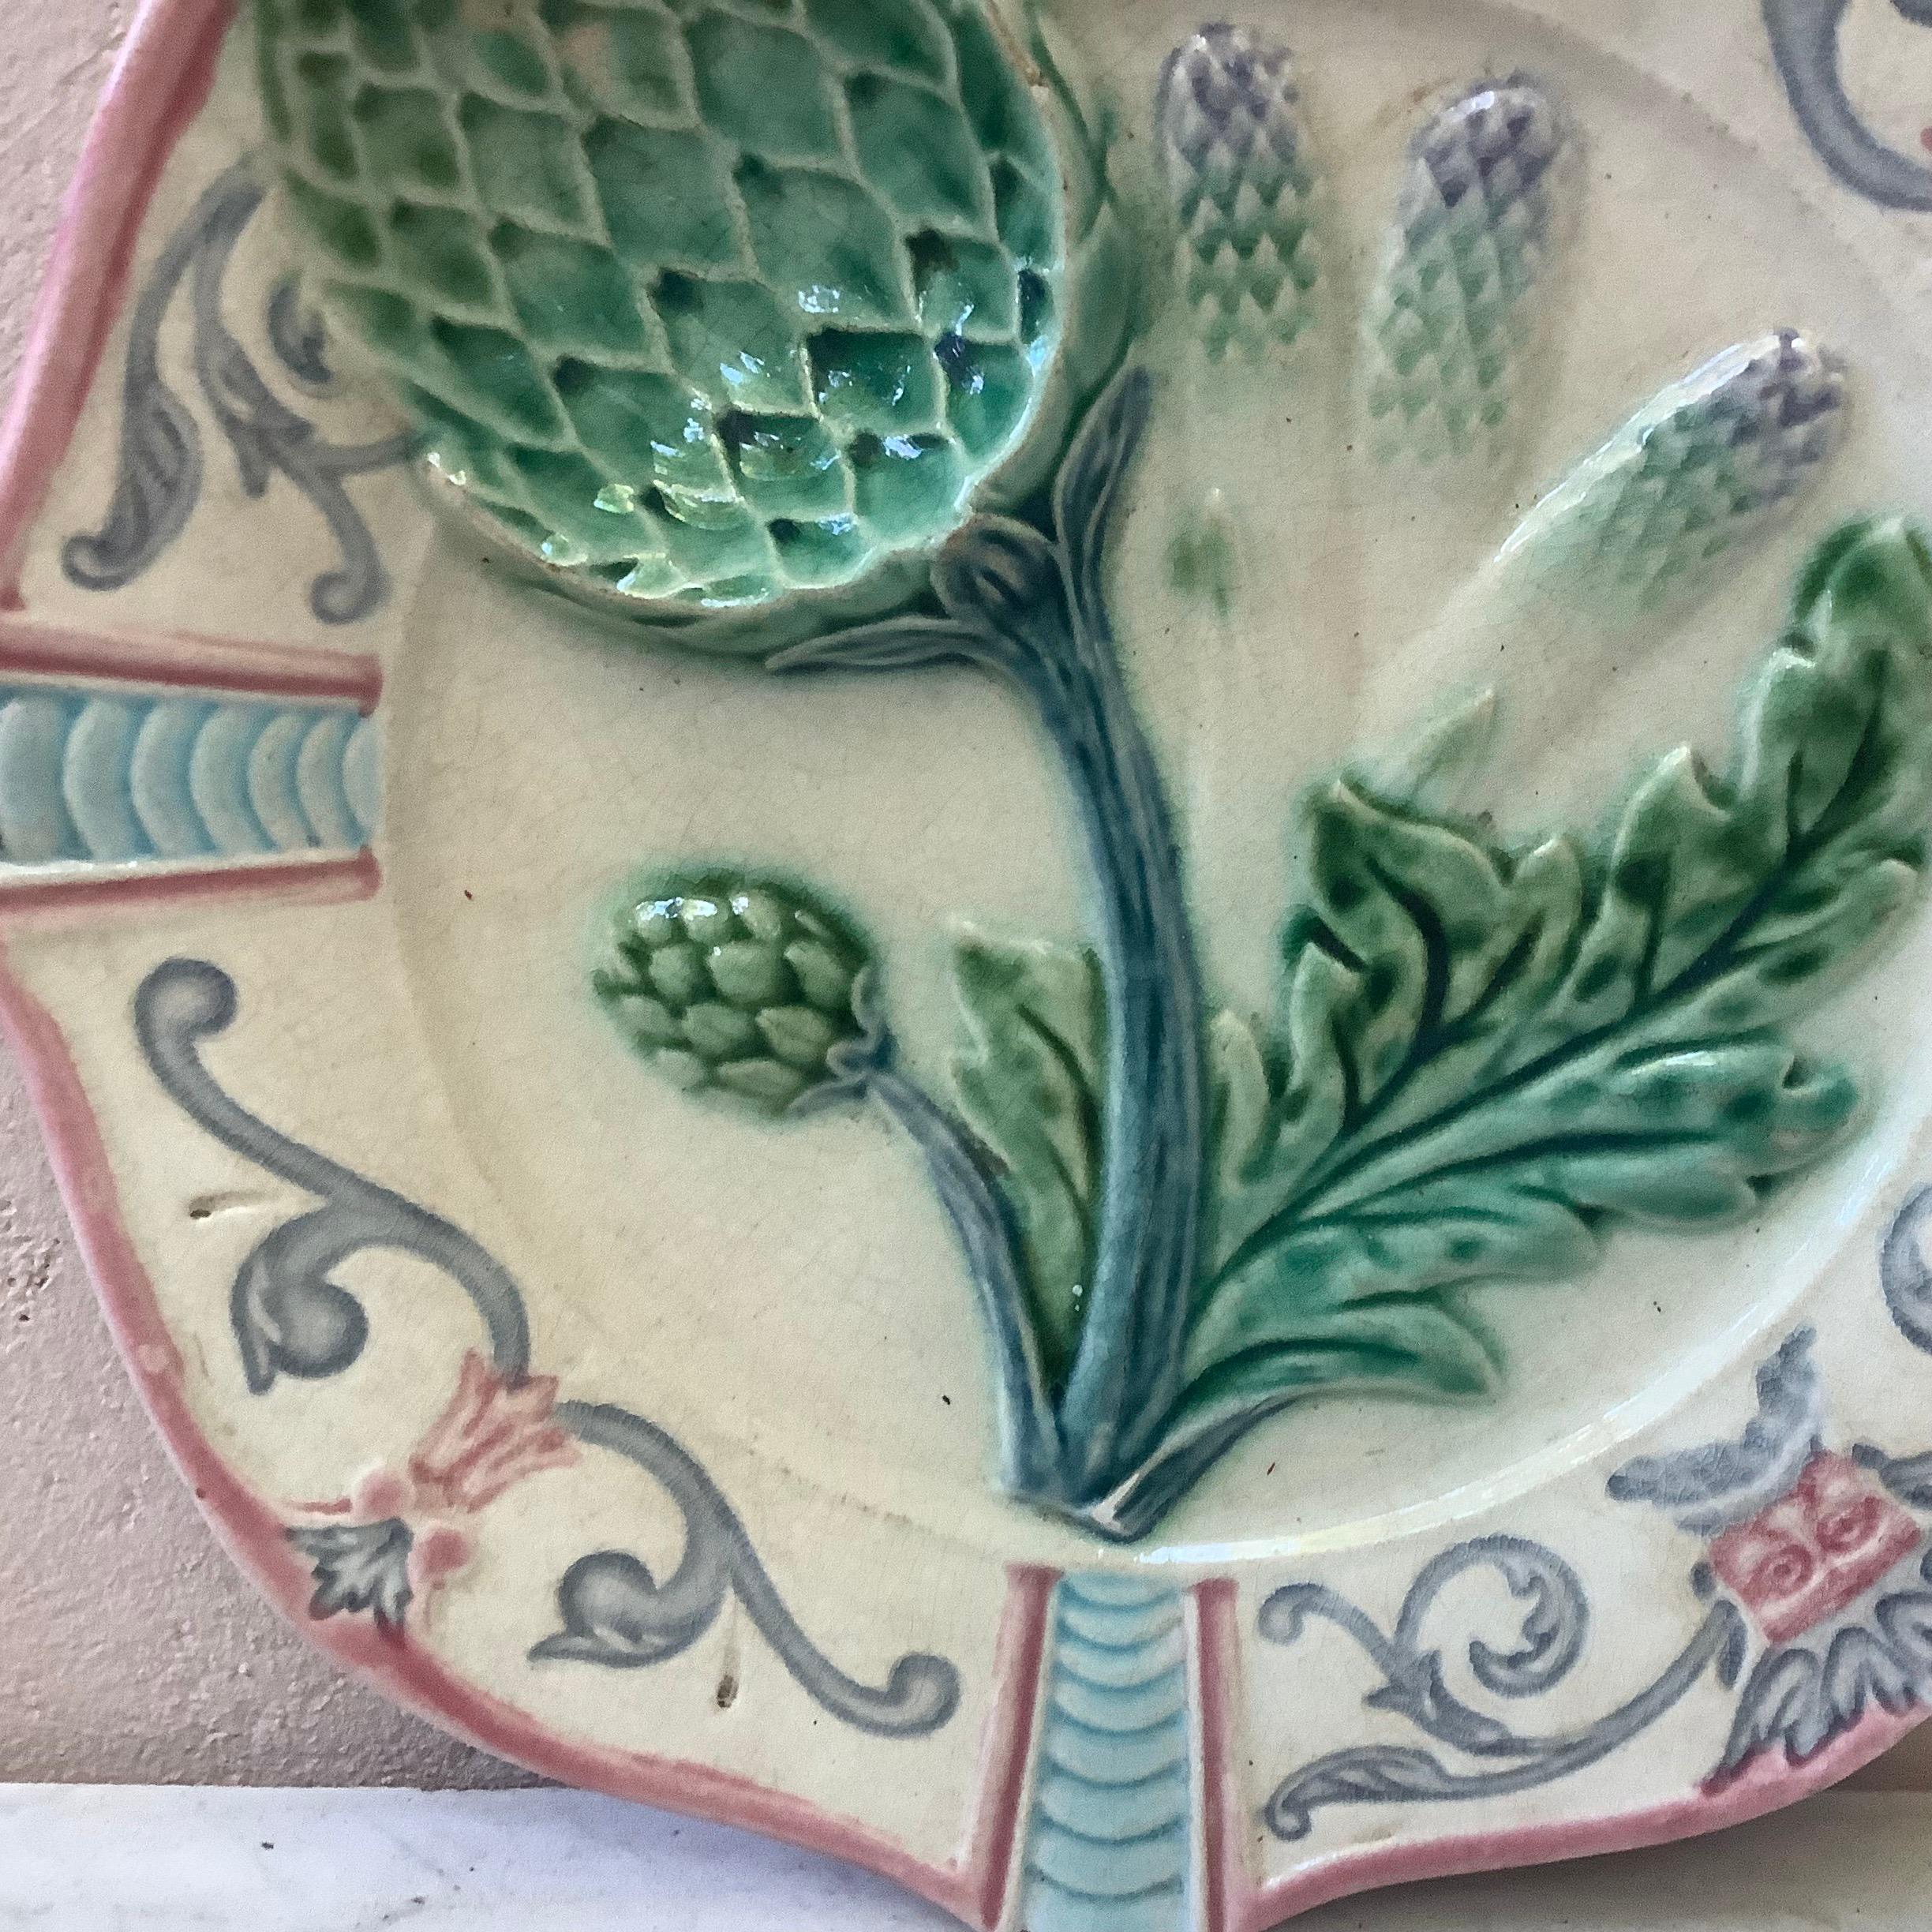 French Majolica asparagus plate fives lille circa 1890.
Decorated with an artichoke and a mask with leaves.